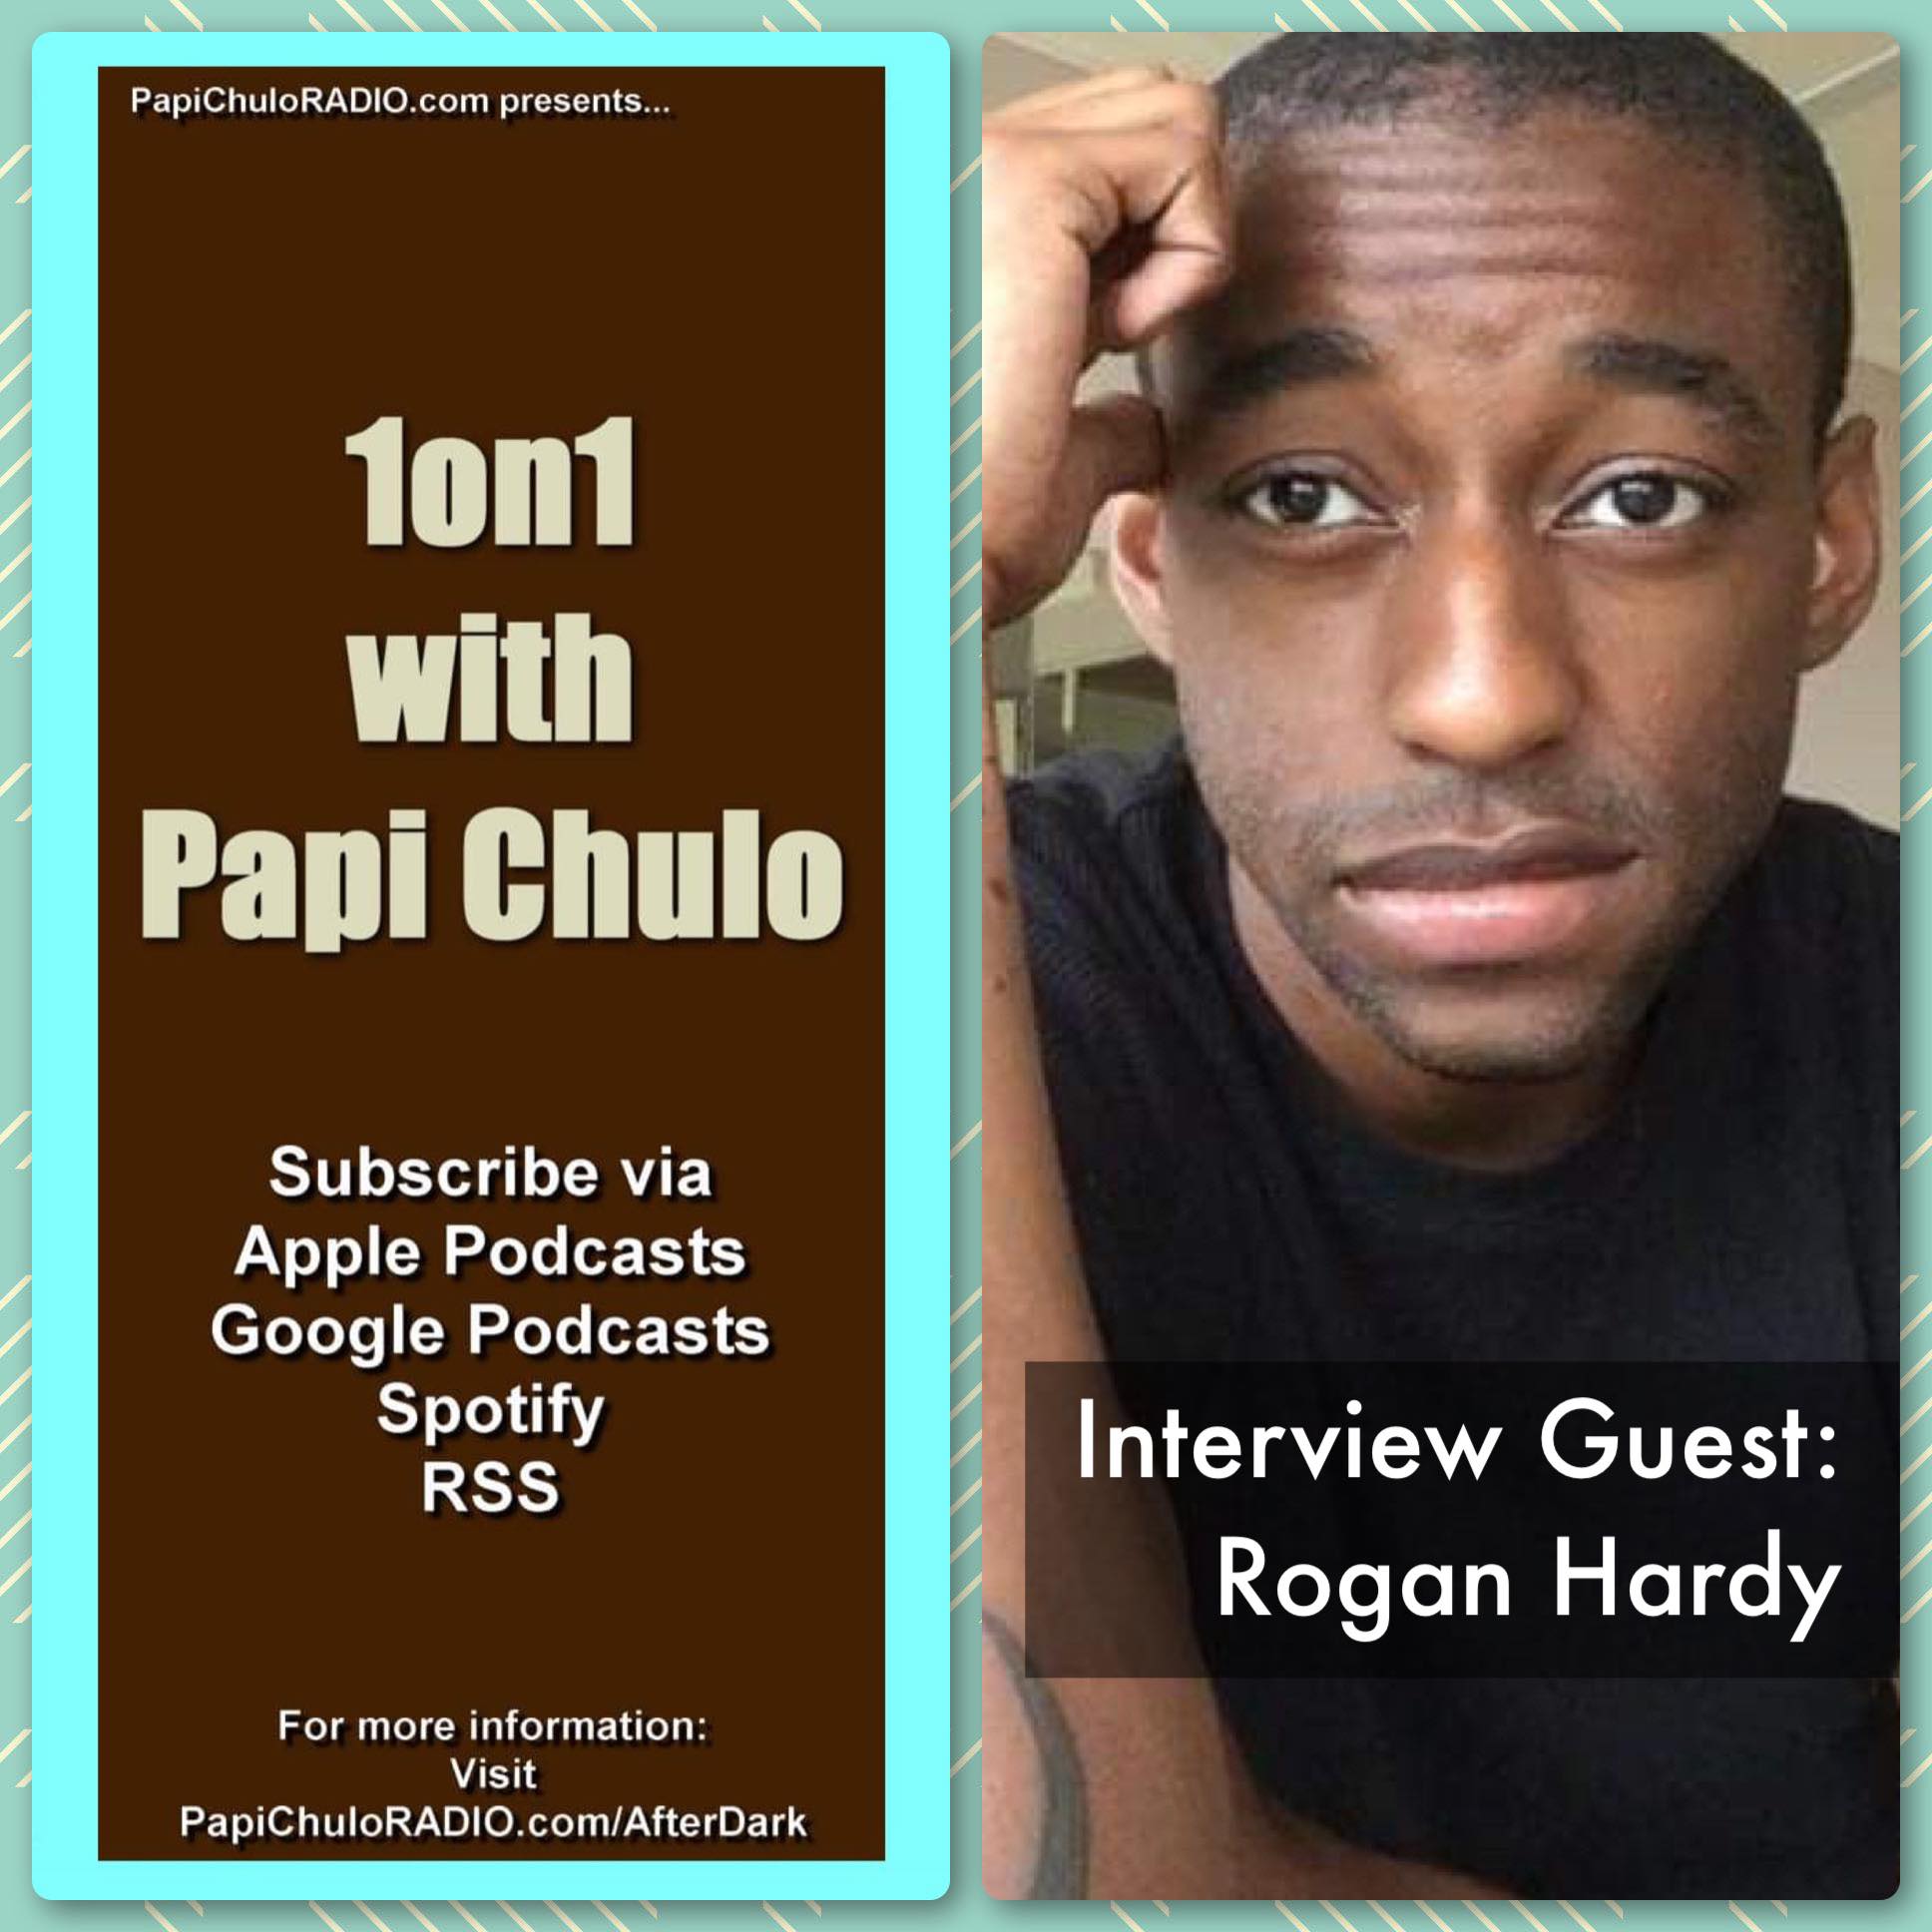 1on1 with Papi Chulo – Special Guest: ROGAN HARDY [April 30, 2015]